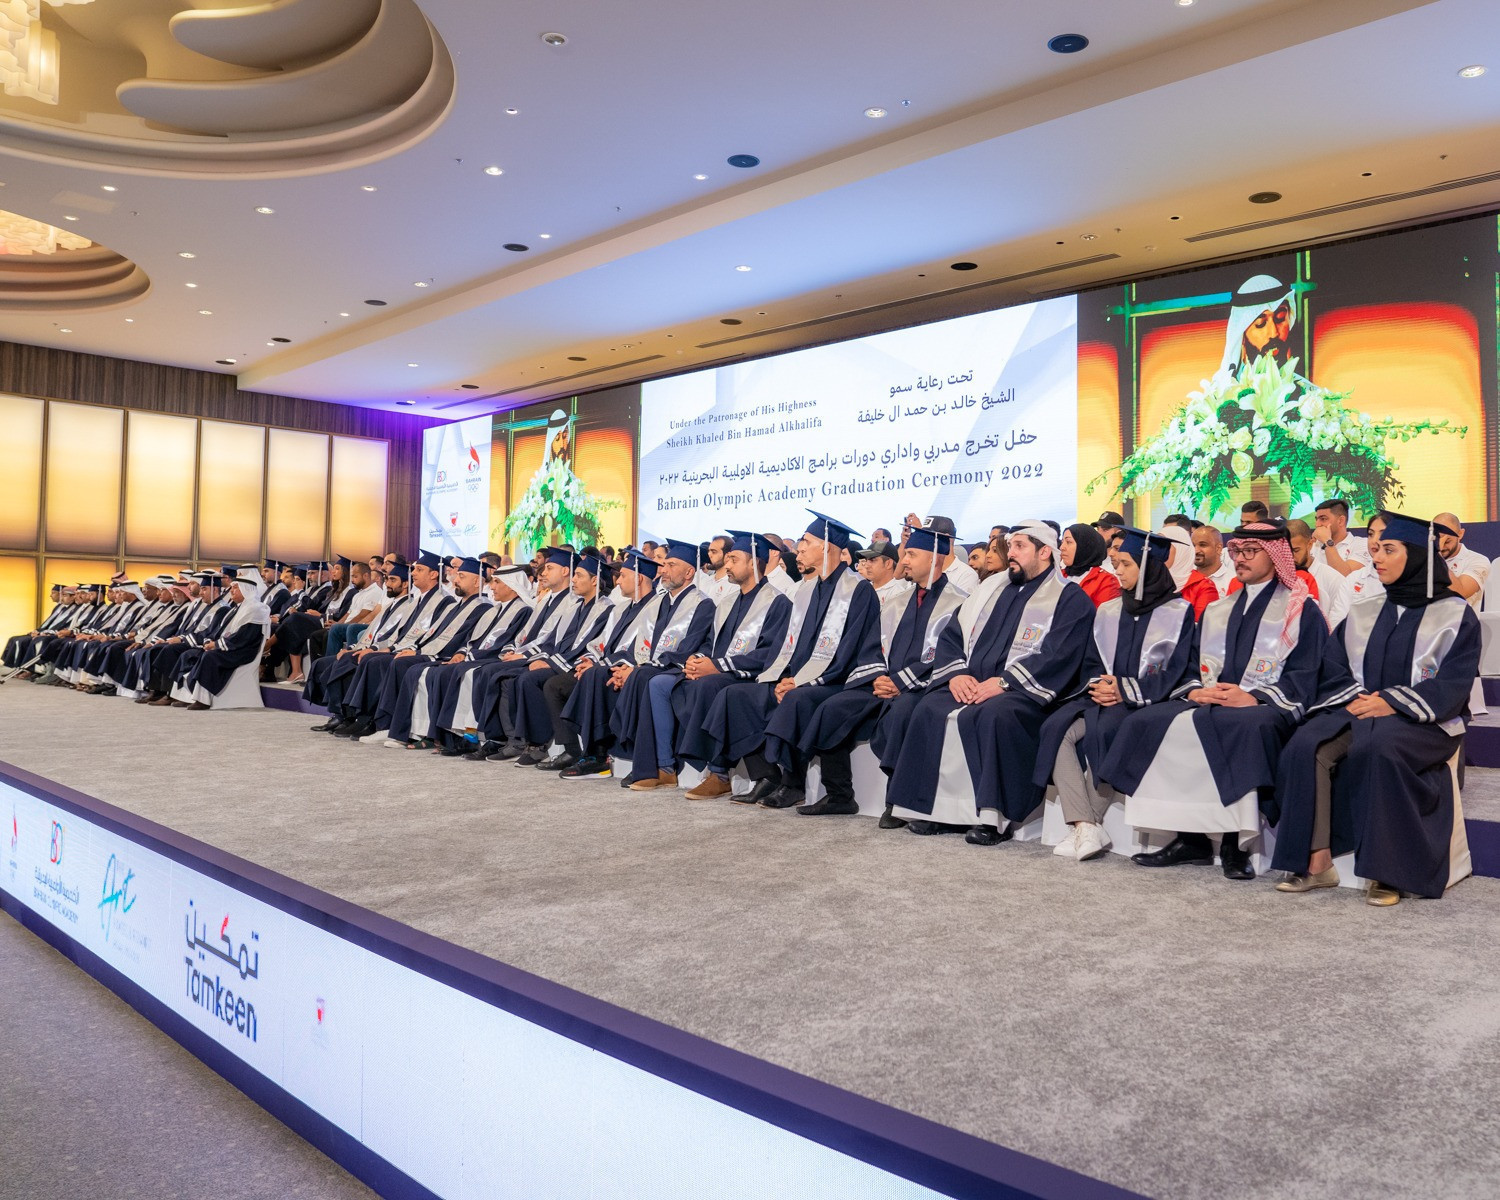 Hundreds graduate from Bahrain Olympic Academy with NOC President present